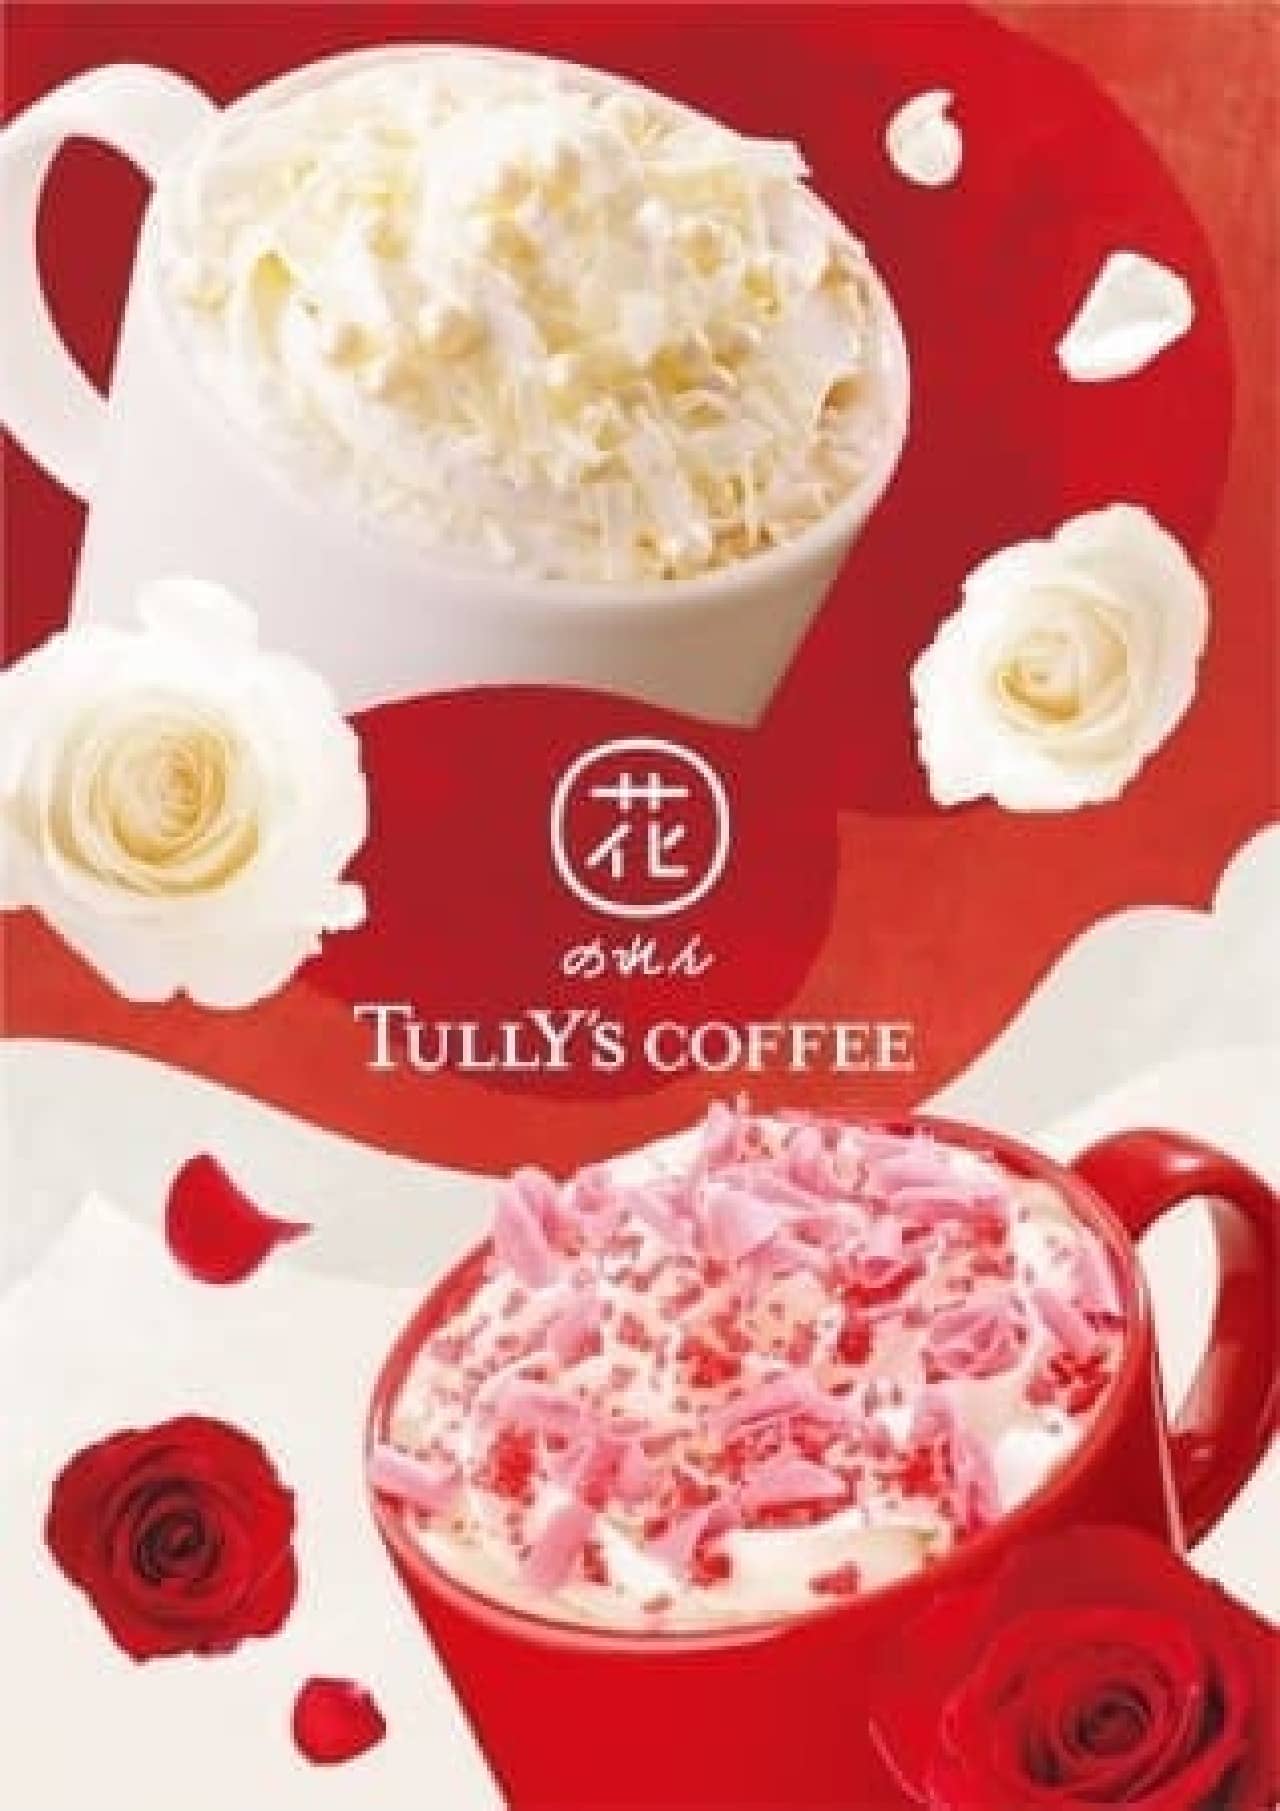 Flower Goodwill Tully's Coffee "Red Cafe Latte" and "White Royal Milk Tea"